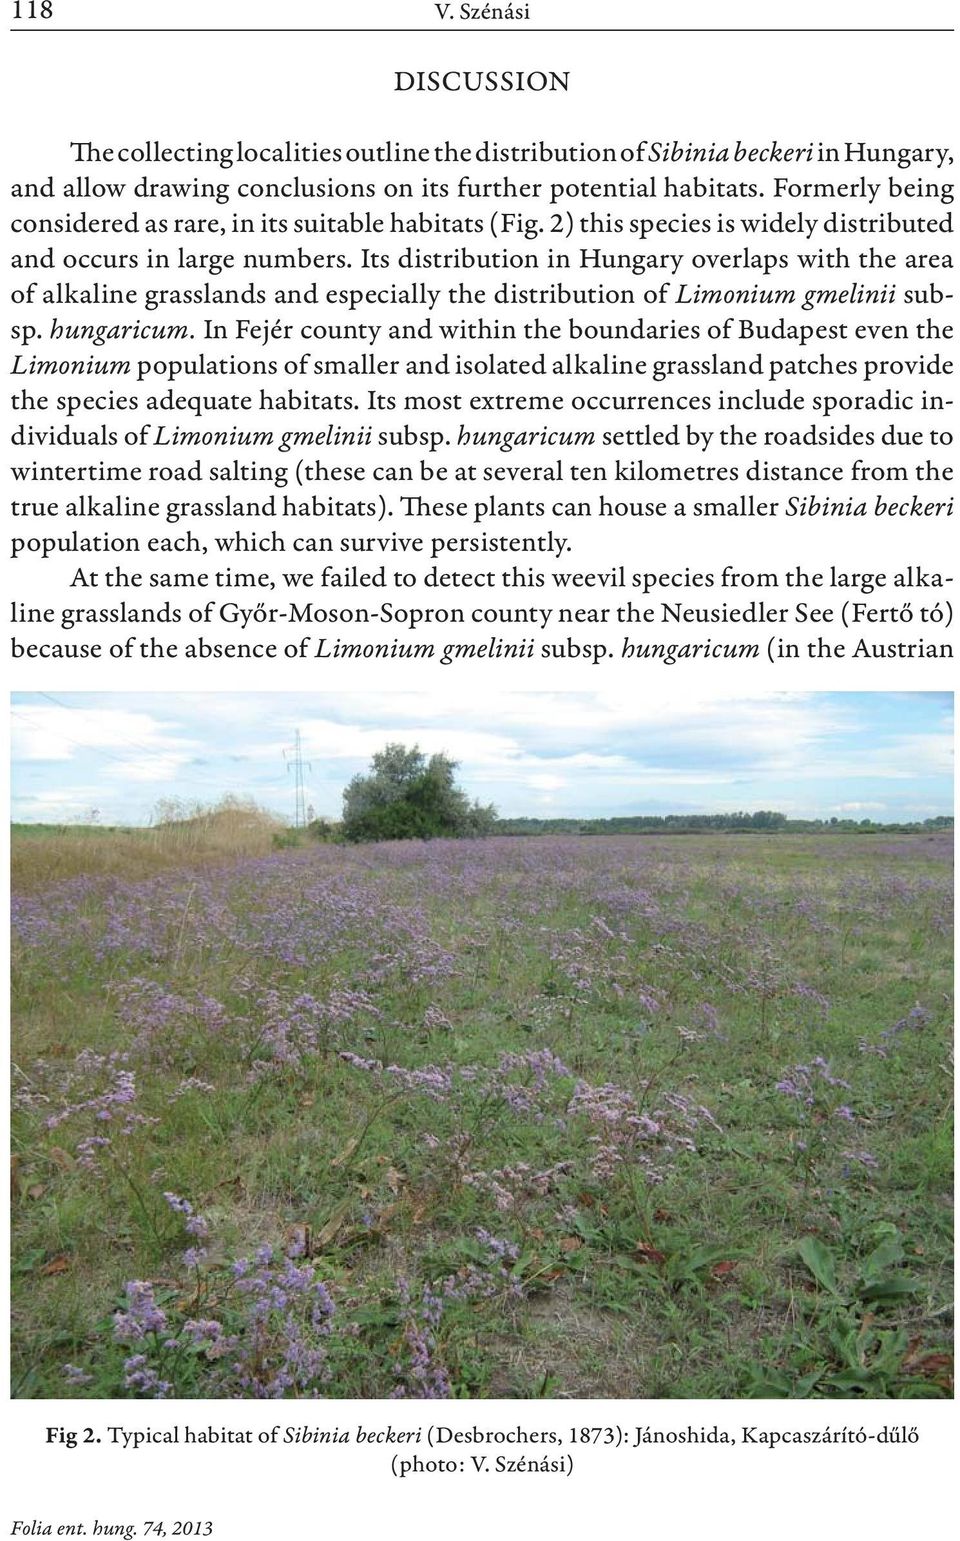 Its distribution in Hungary overlaps with the area of alkaline grasslands and especially the distribution of Limonium gmelinii subsp. hungaricum.